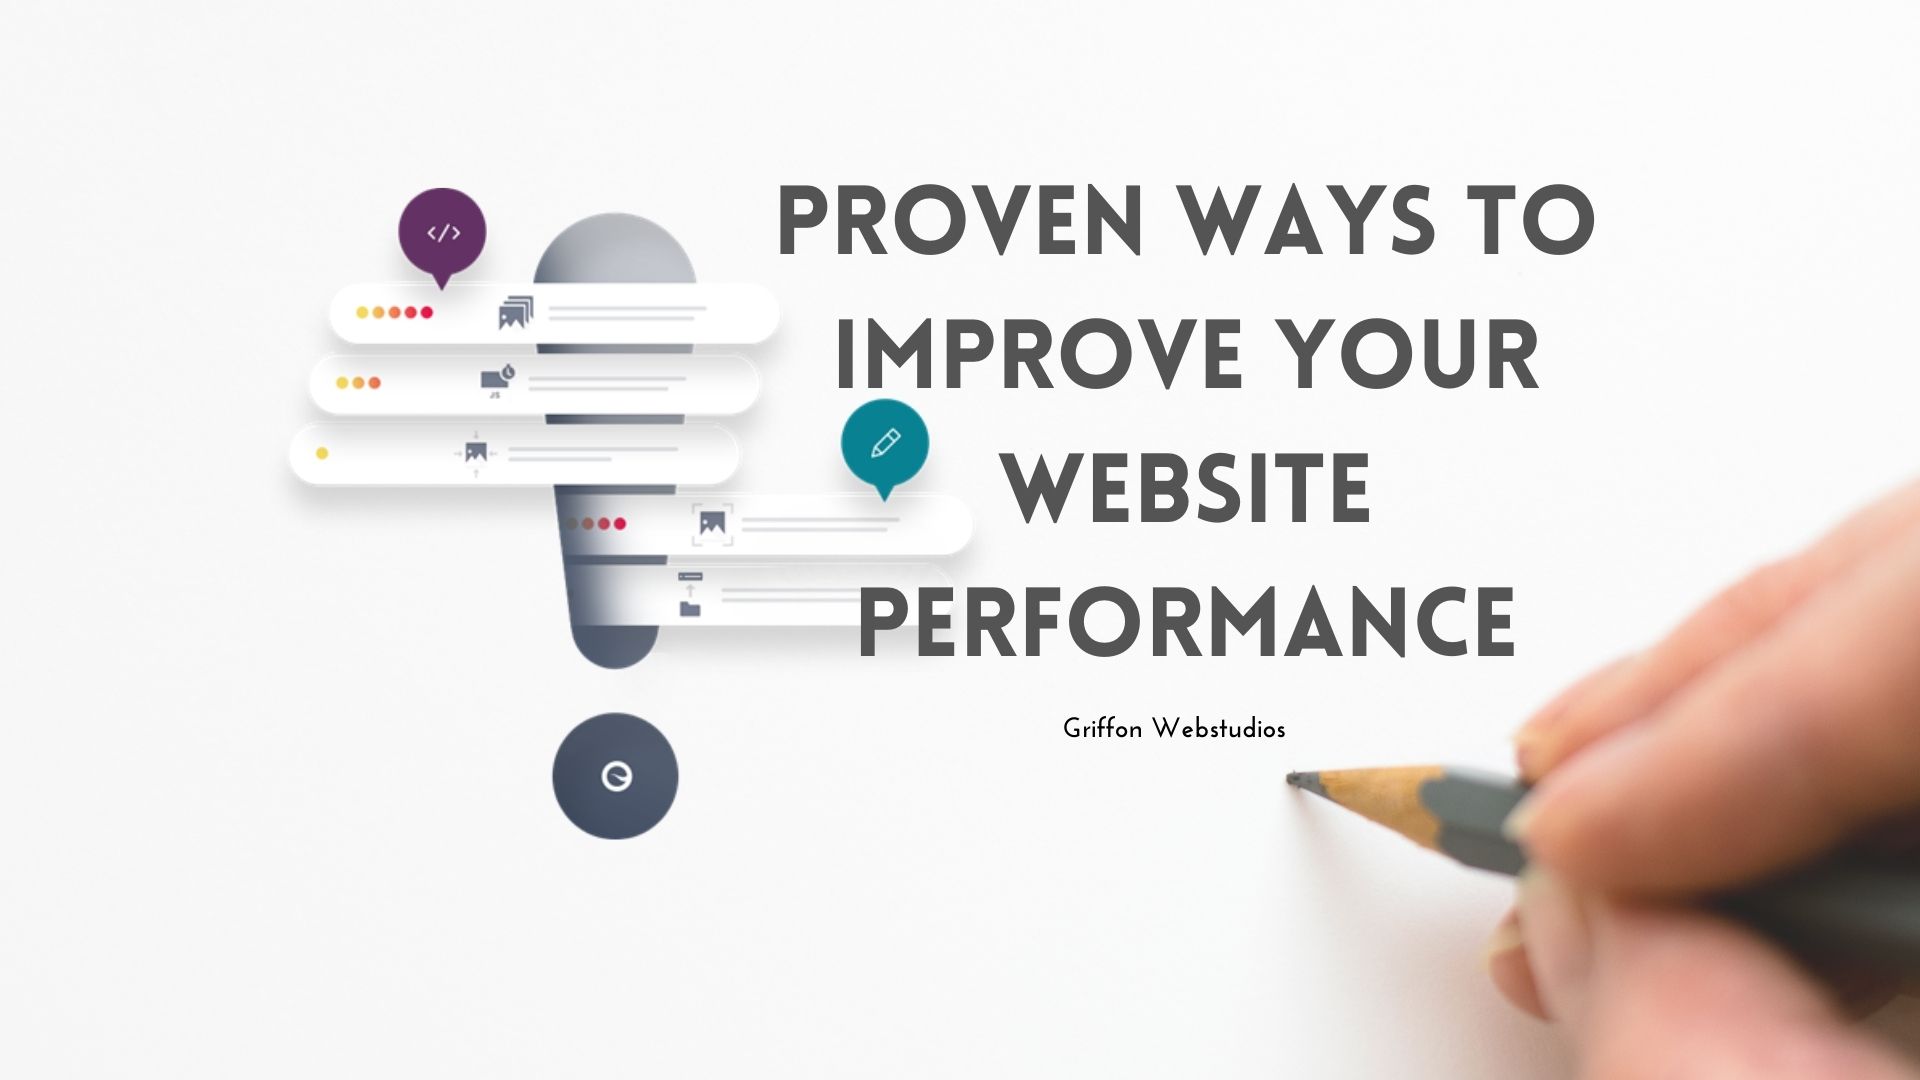 Proven Ways to Improve Your Website Performance